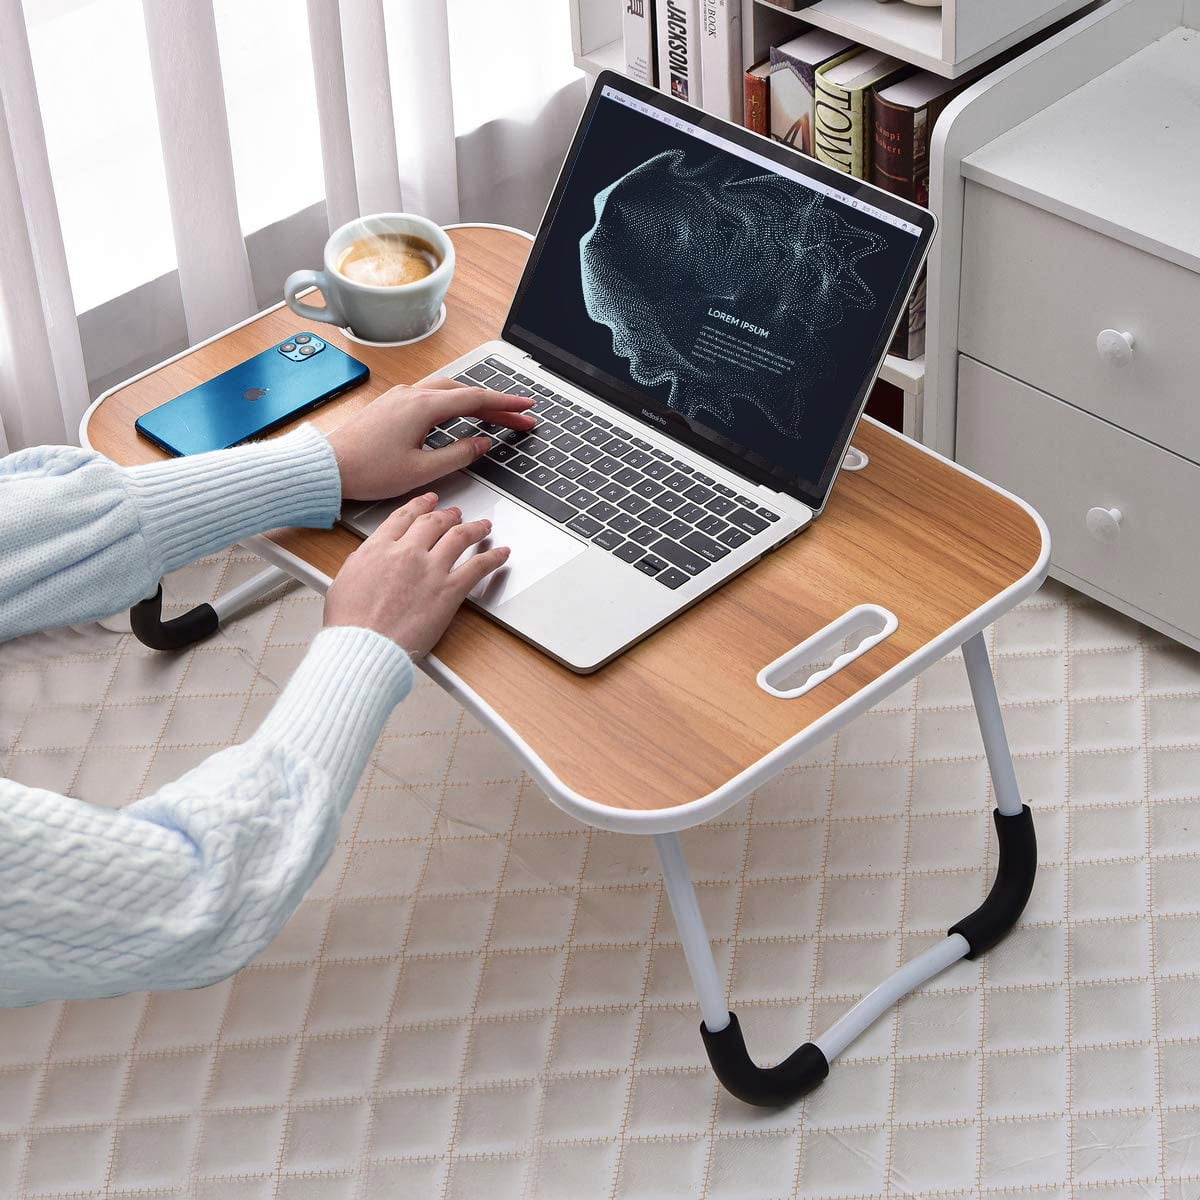 Details about   Portable Folding Lap Desk Computer Laptop Breakfast Tray Bed Couch Table Stand* 